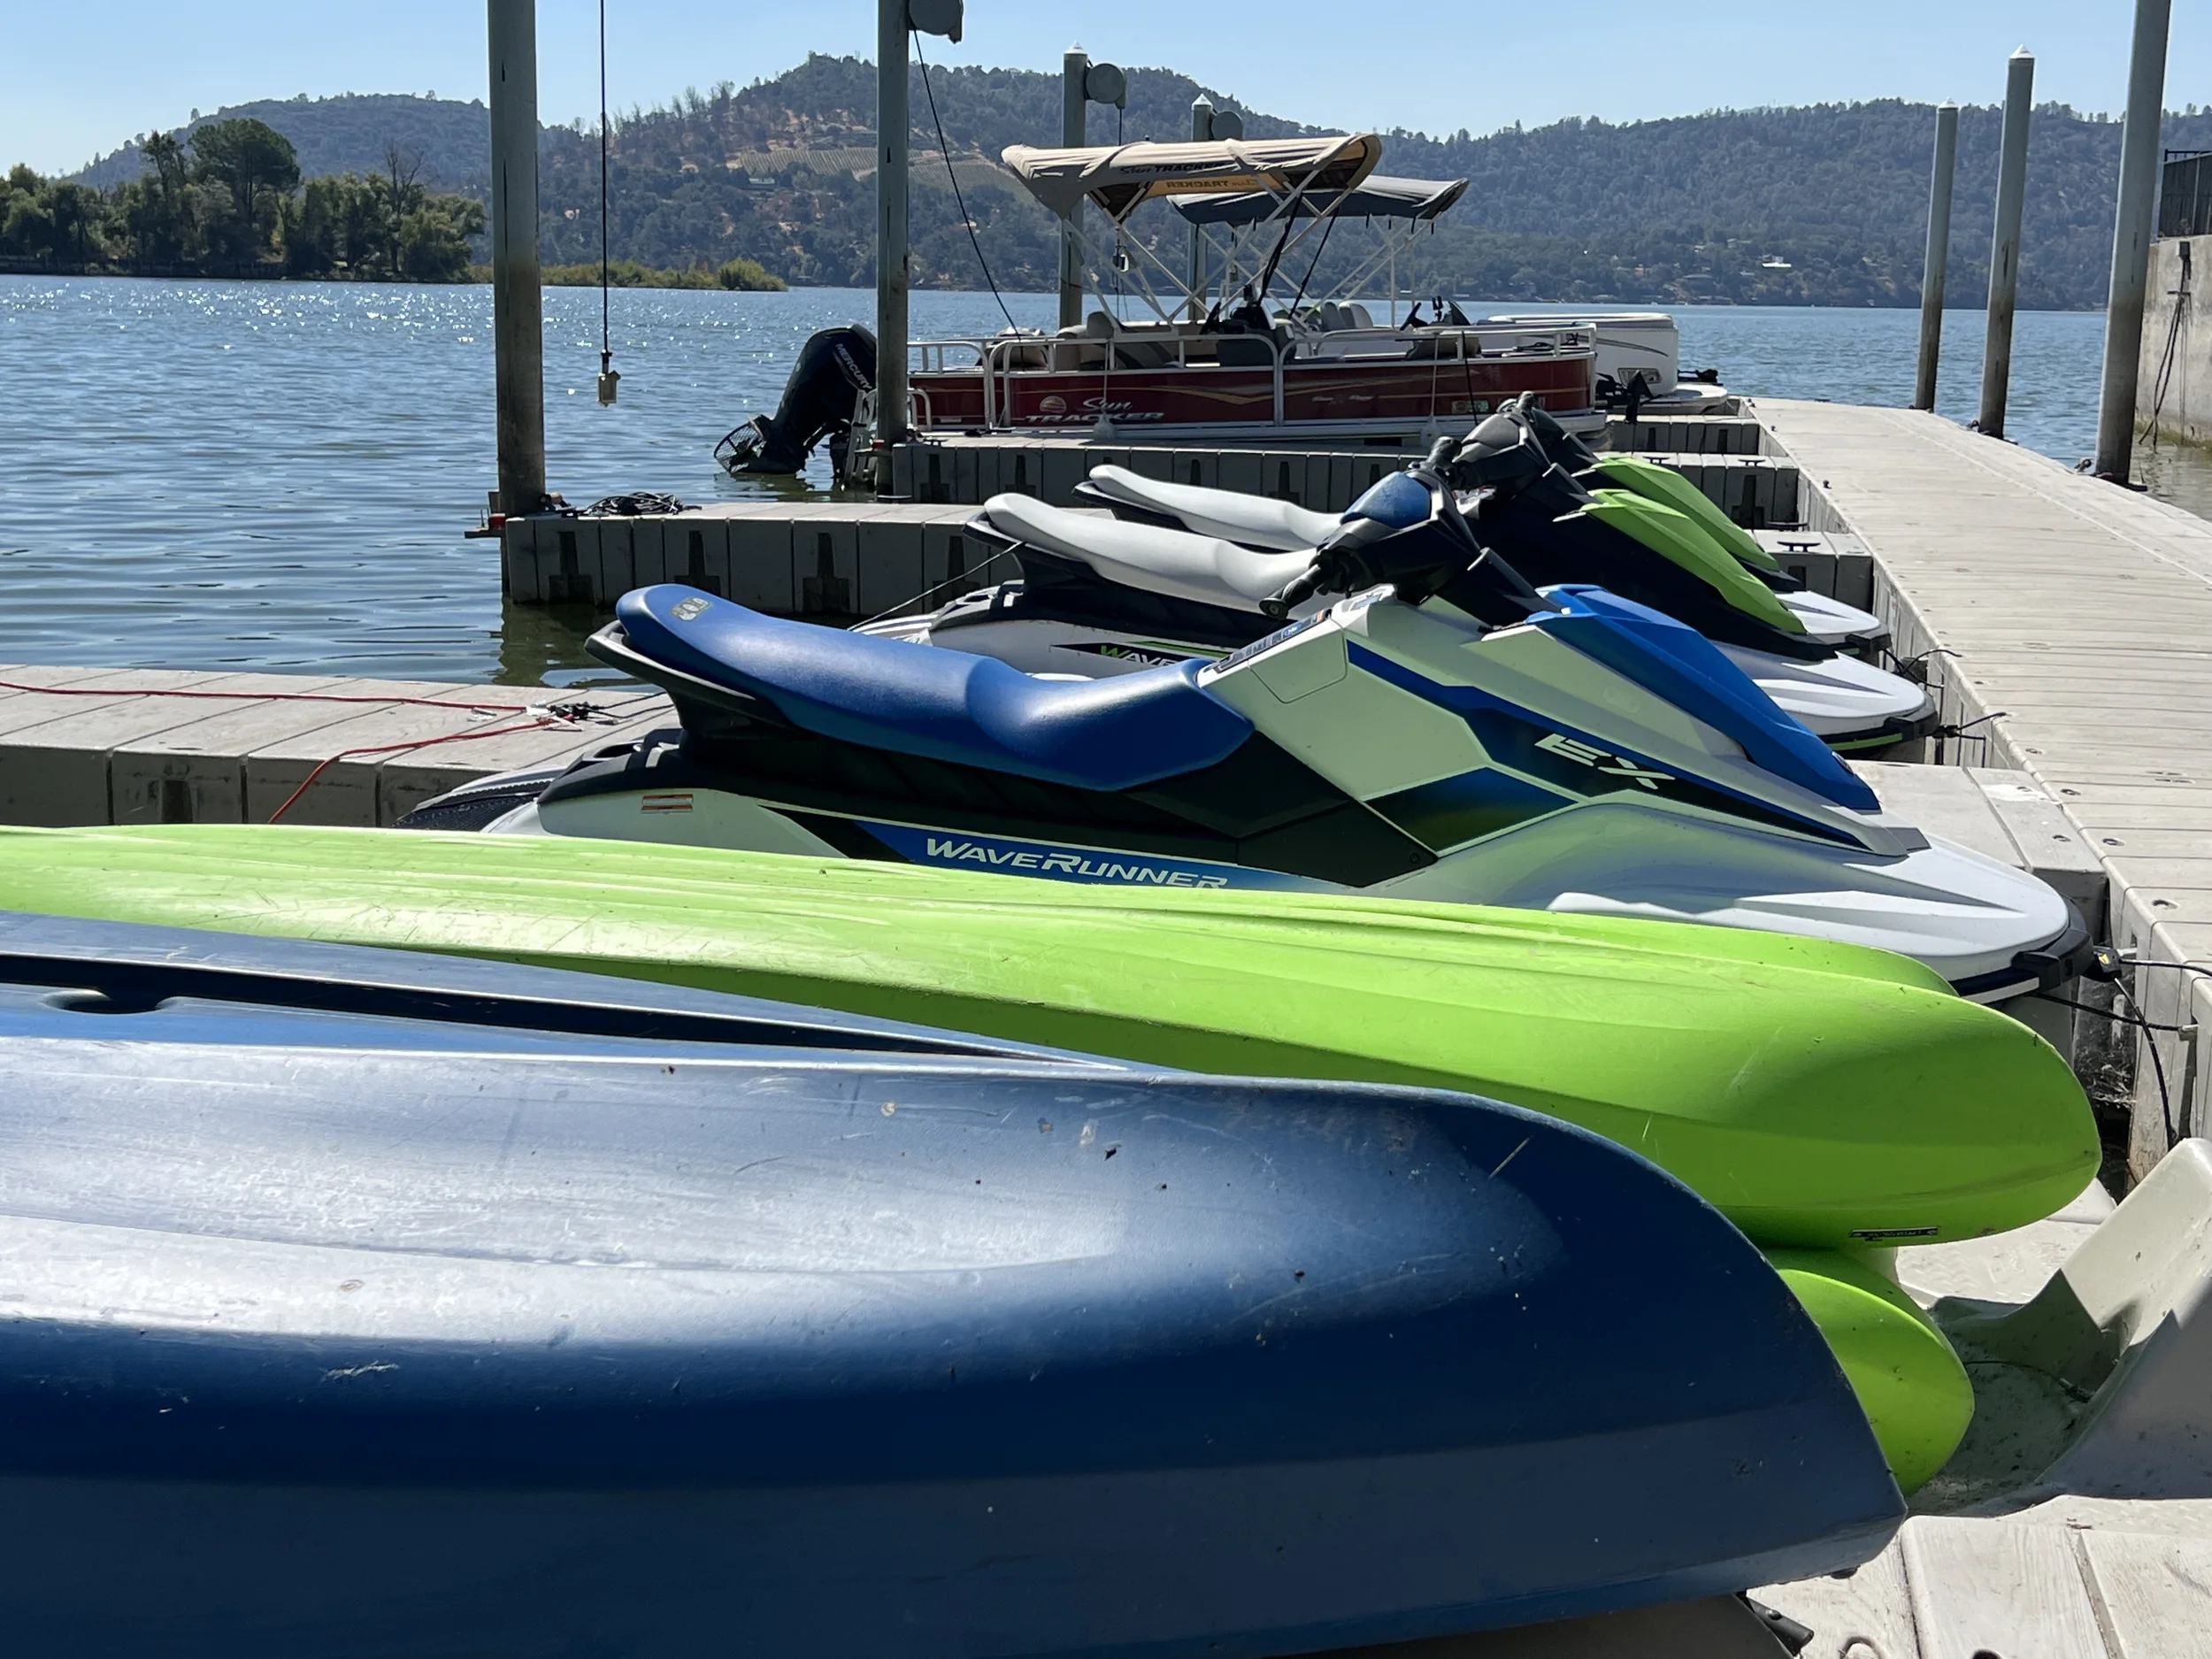 Rent one of our pontoon boats, bass boats, Waverunner or kayaks